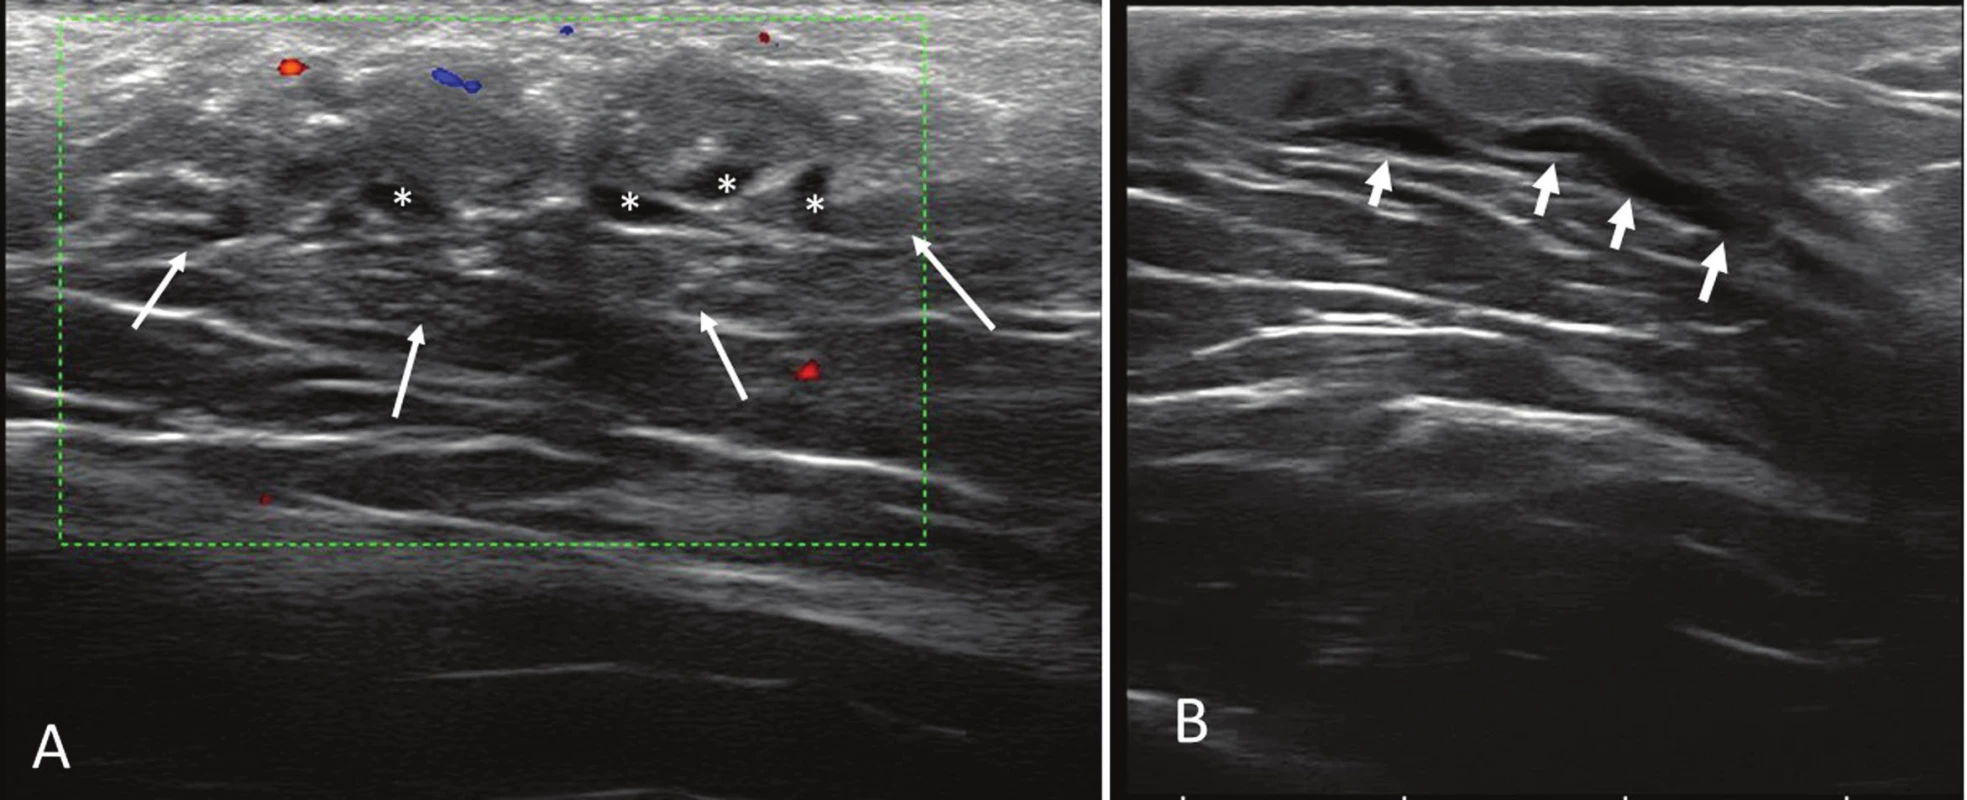 Sonography study. Axial (A) and longitudinal (B) sonograms of the lesion. Notice the anechoic tubular structures (*) and the poorly defined margins of
the mass (white arrows).